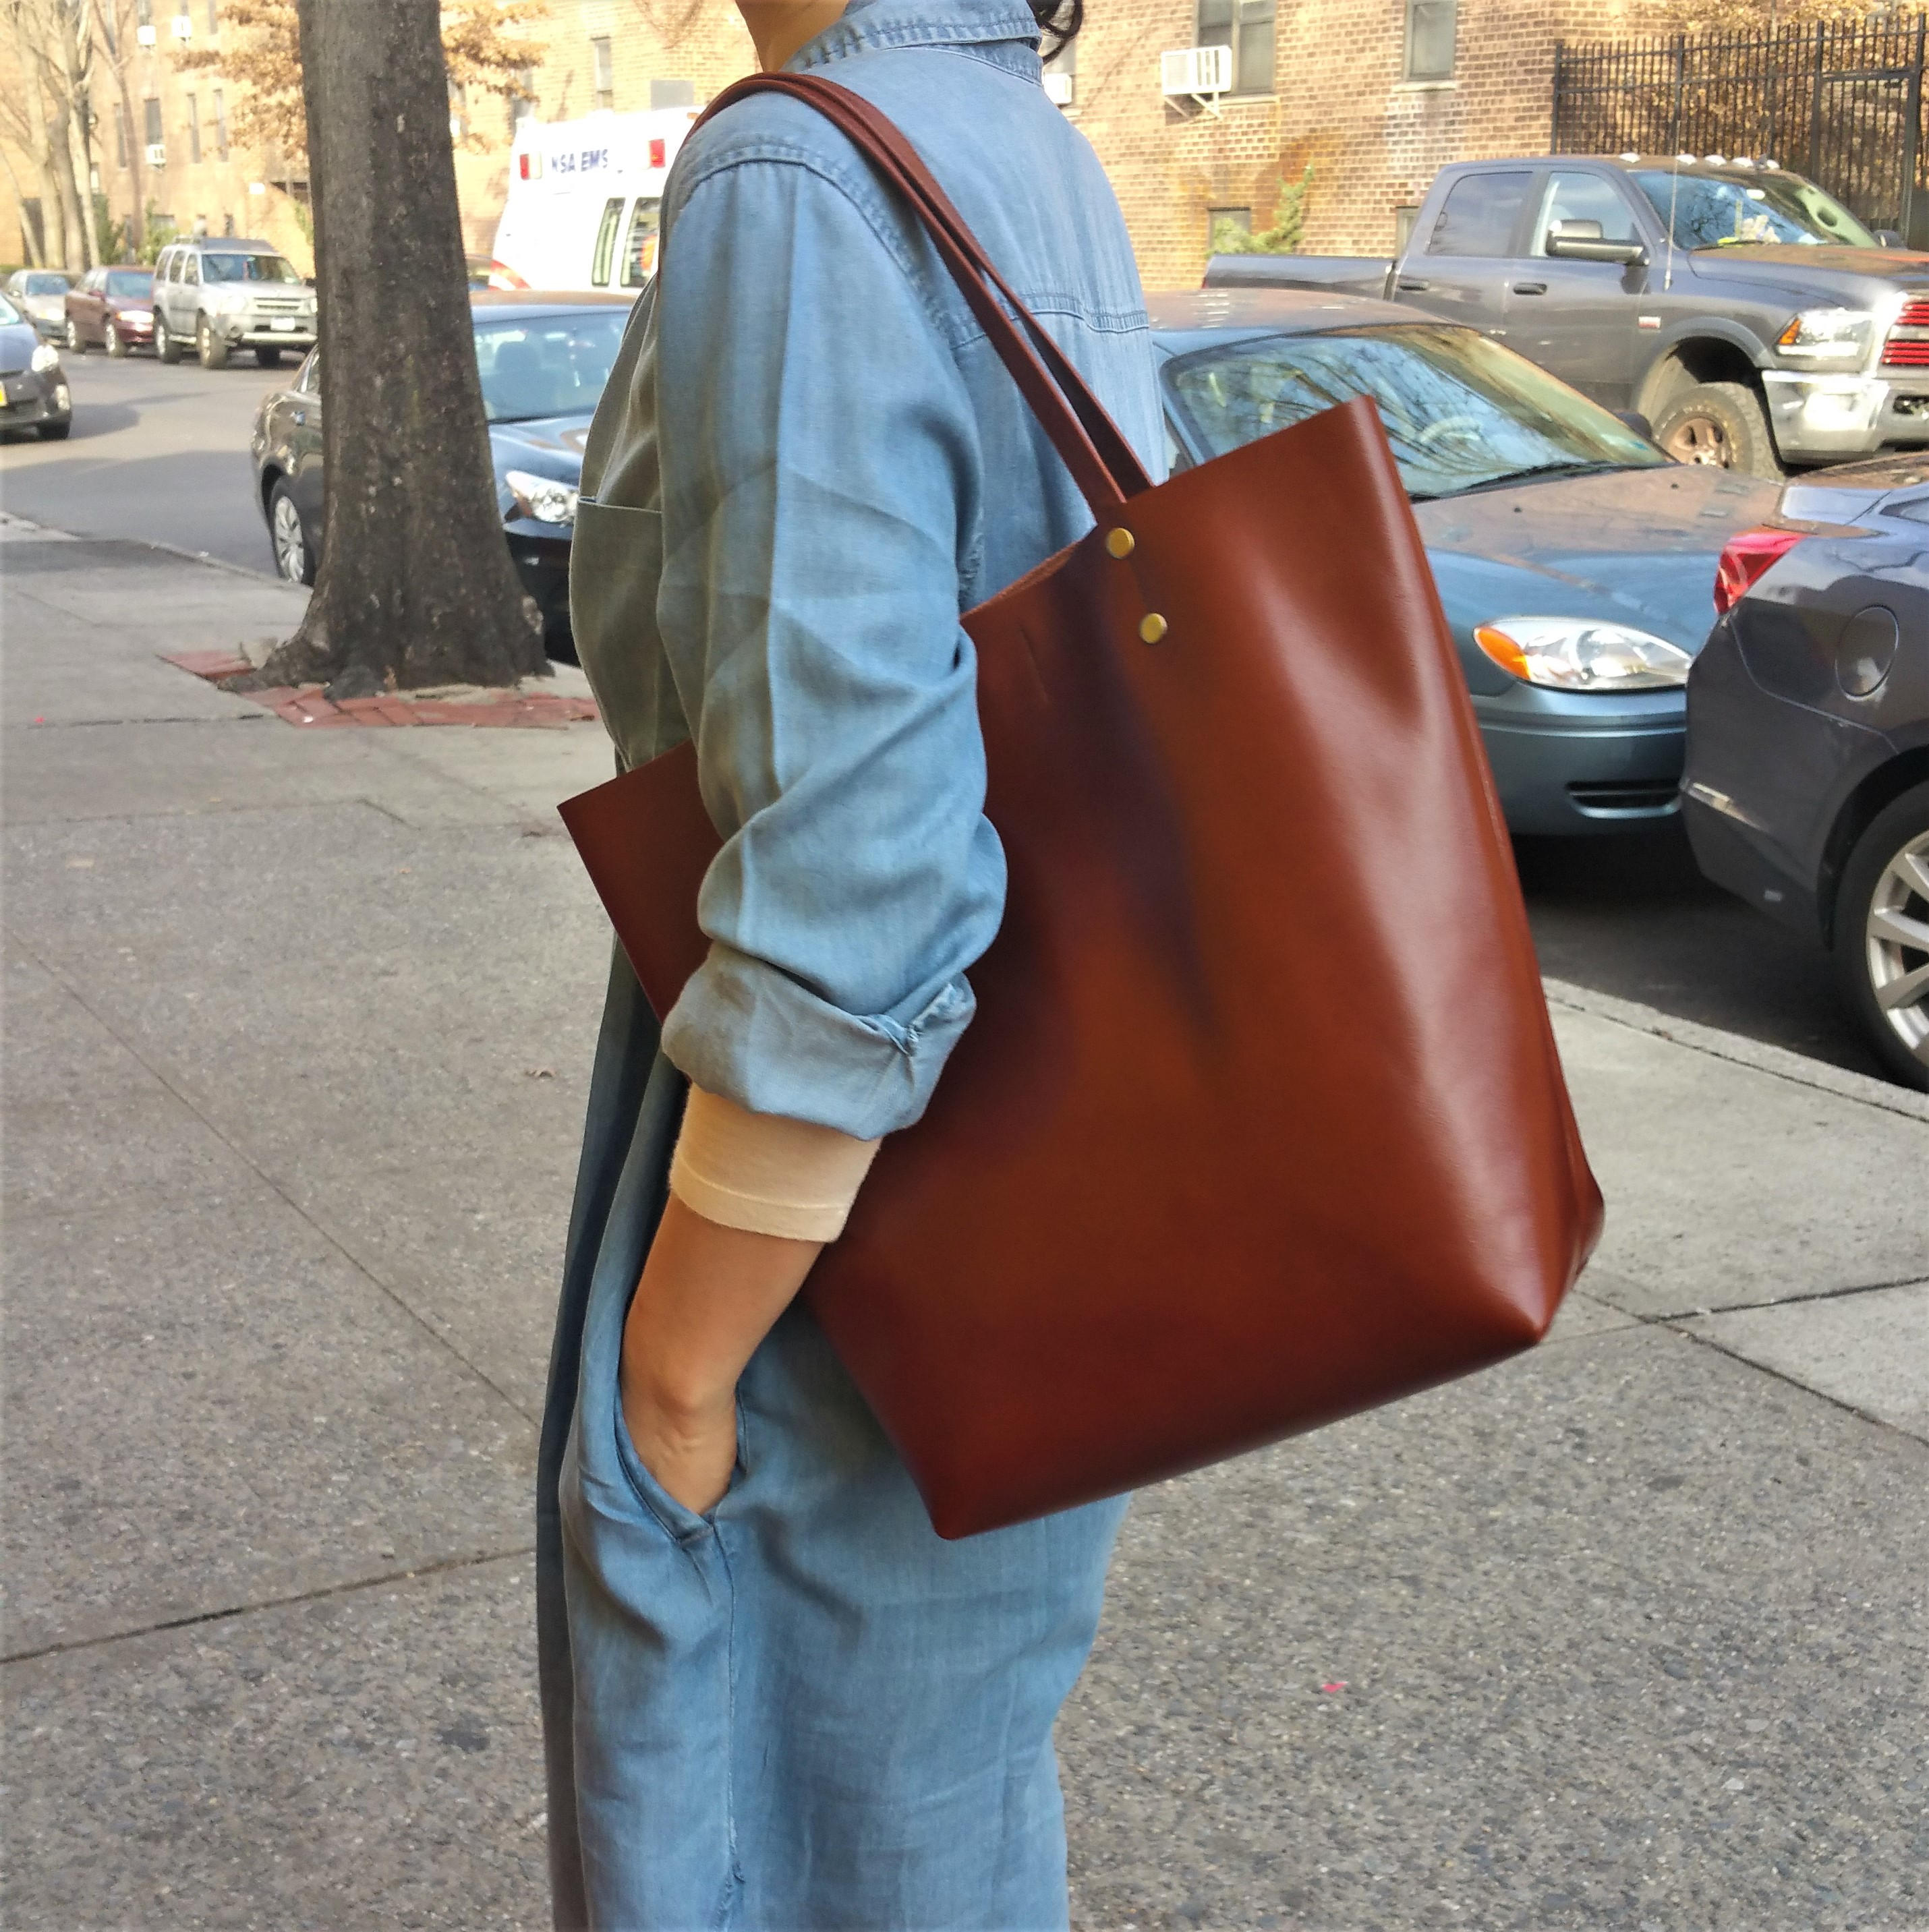 The Row, Bags, Brown Large Ns Park Tote Bag In Leather